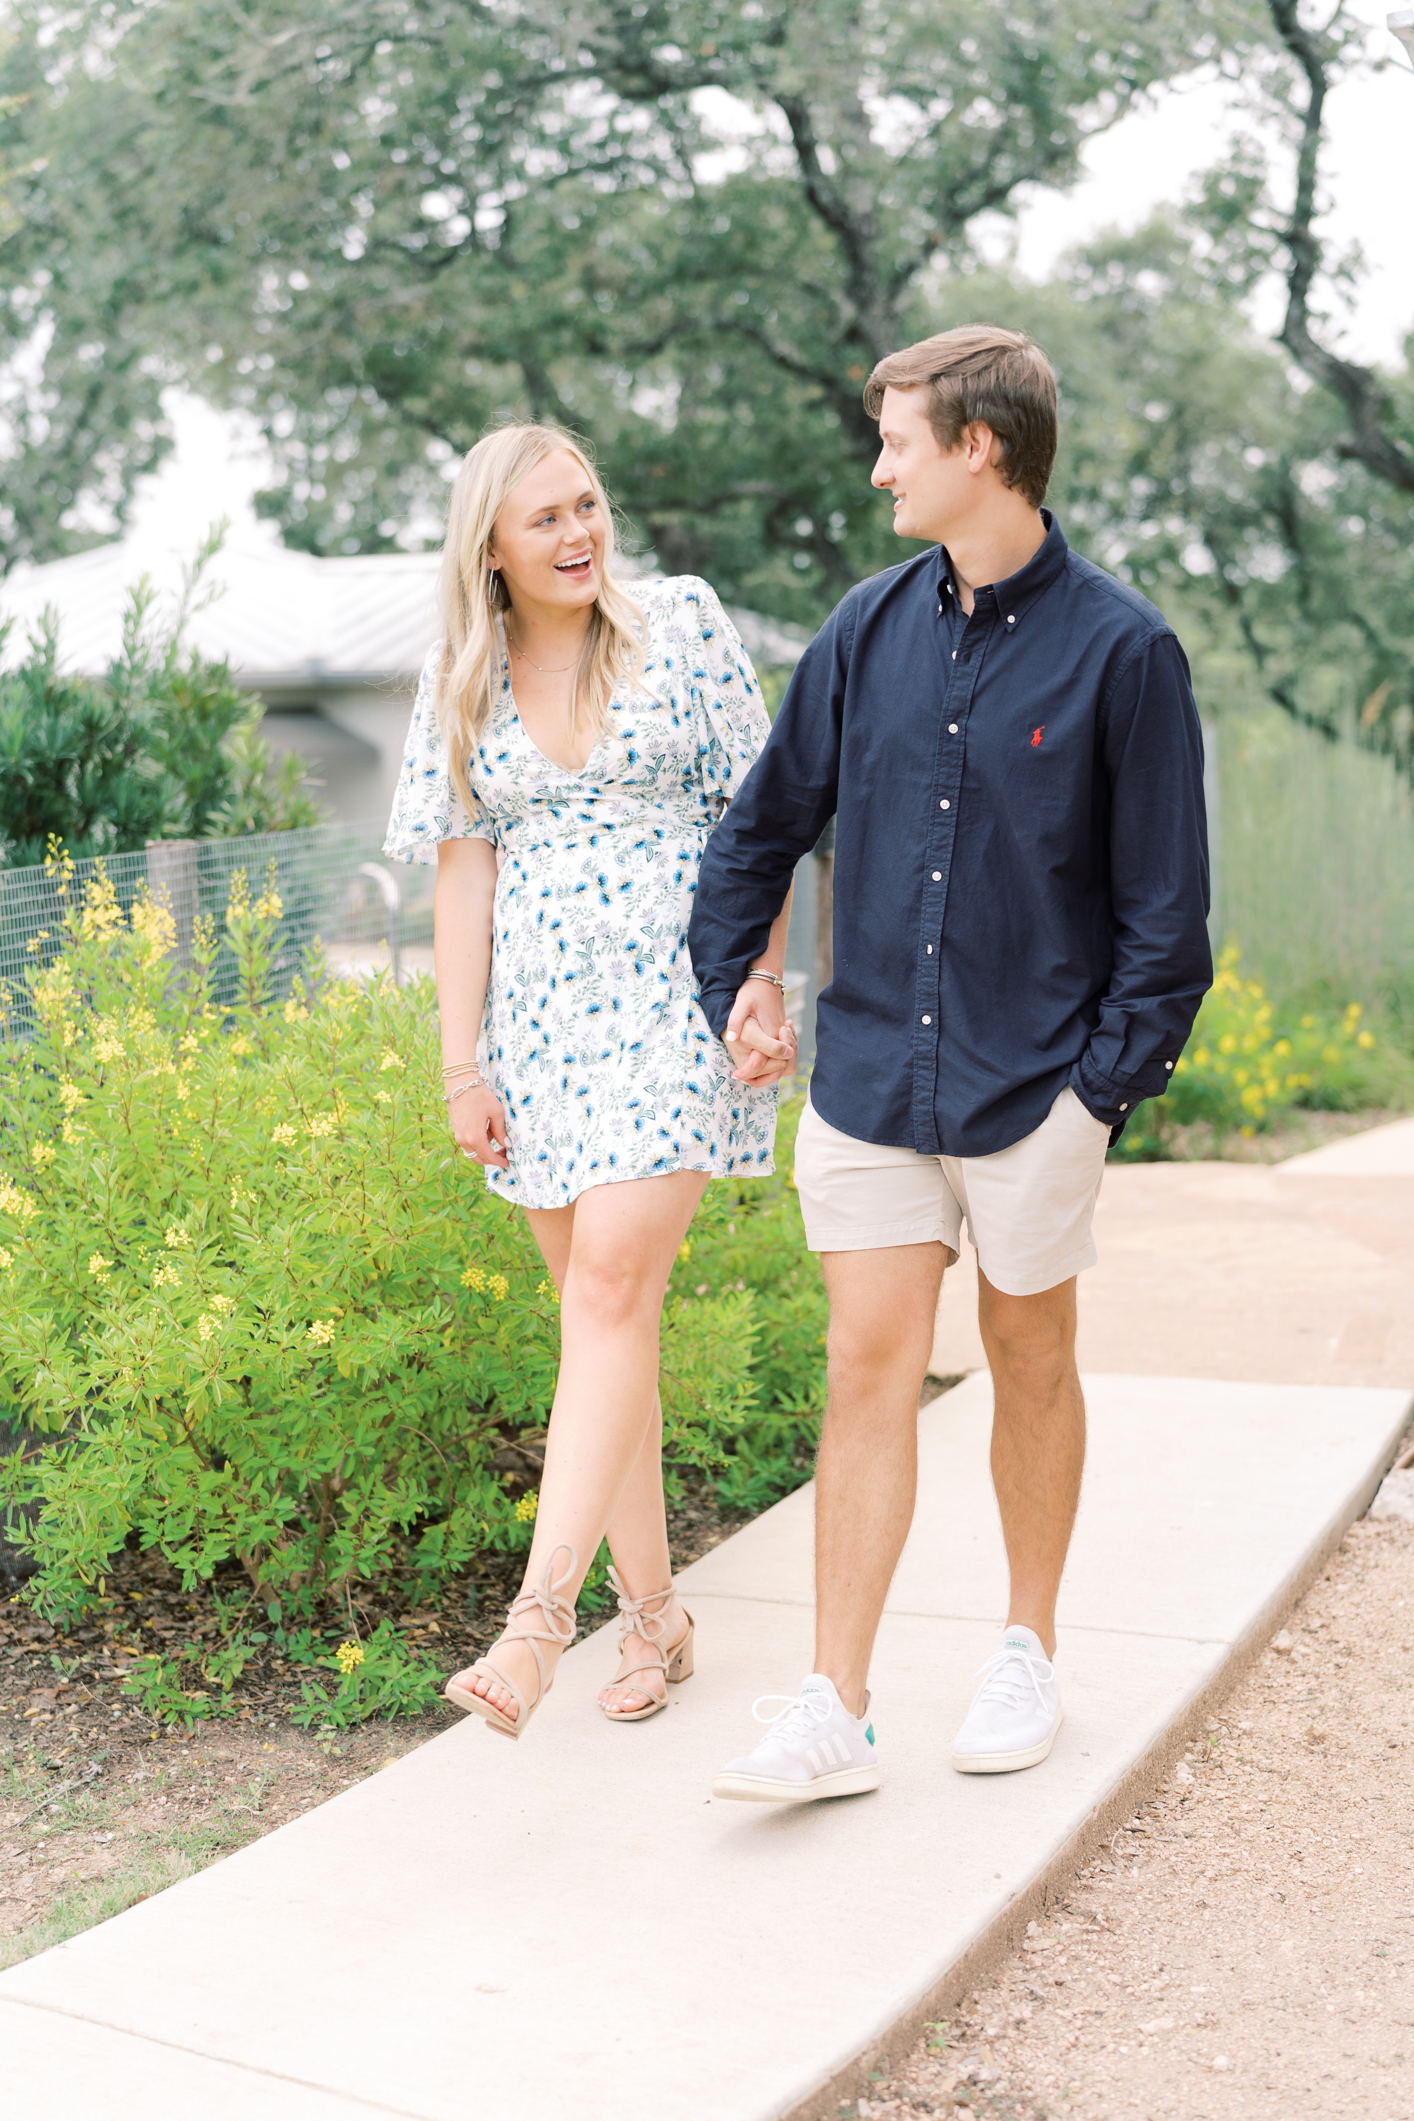 If you're looking for an adorable lifestyle engagement session in ATX, look no further!!! The Wayback cafe and cottages is an adorable venue out in Bee Caves, TX near Austin. We have the most fun engagement session here!